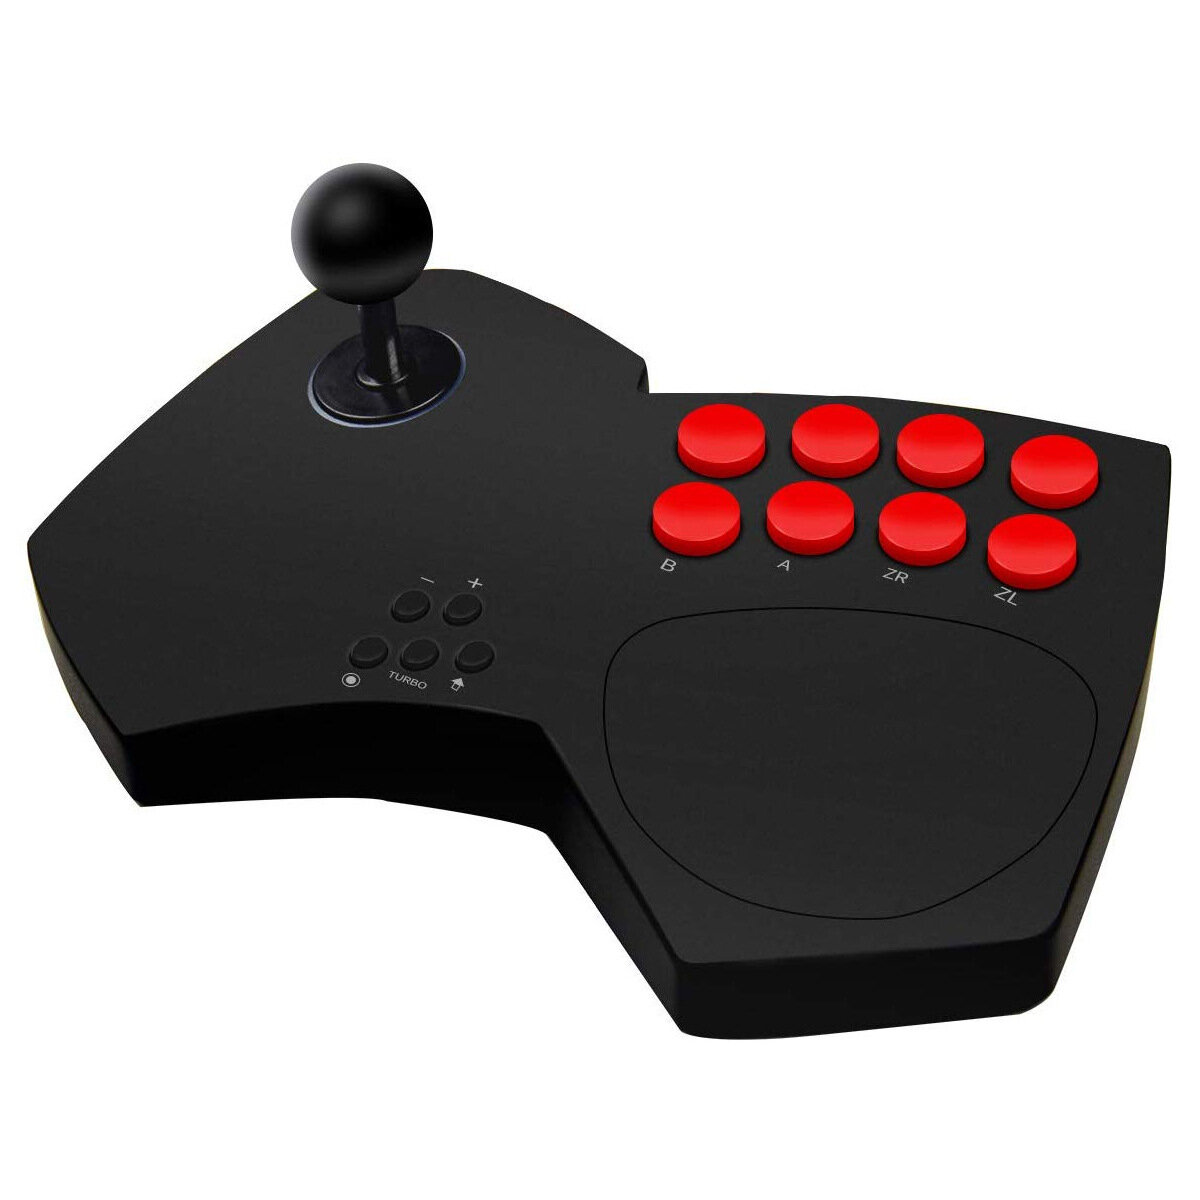 

DOYO PC Arcade Rocker Joystick Game Controller Two Player Sparring for Nintendo Switch PS3 Game Console Android Mobile P